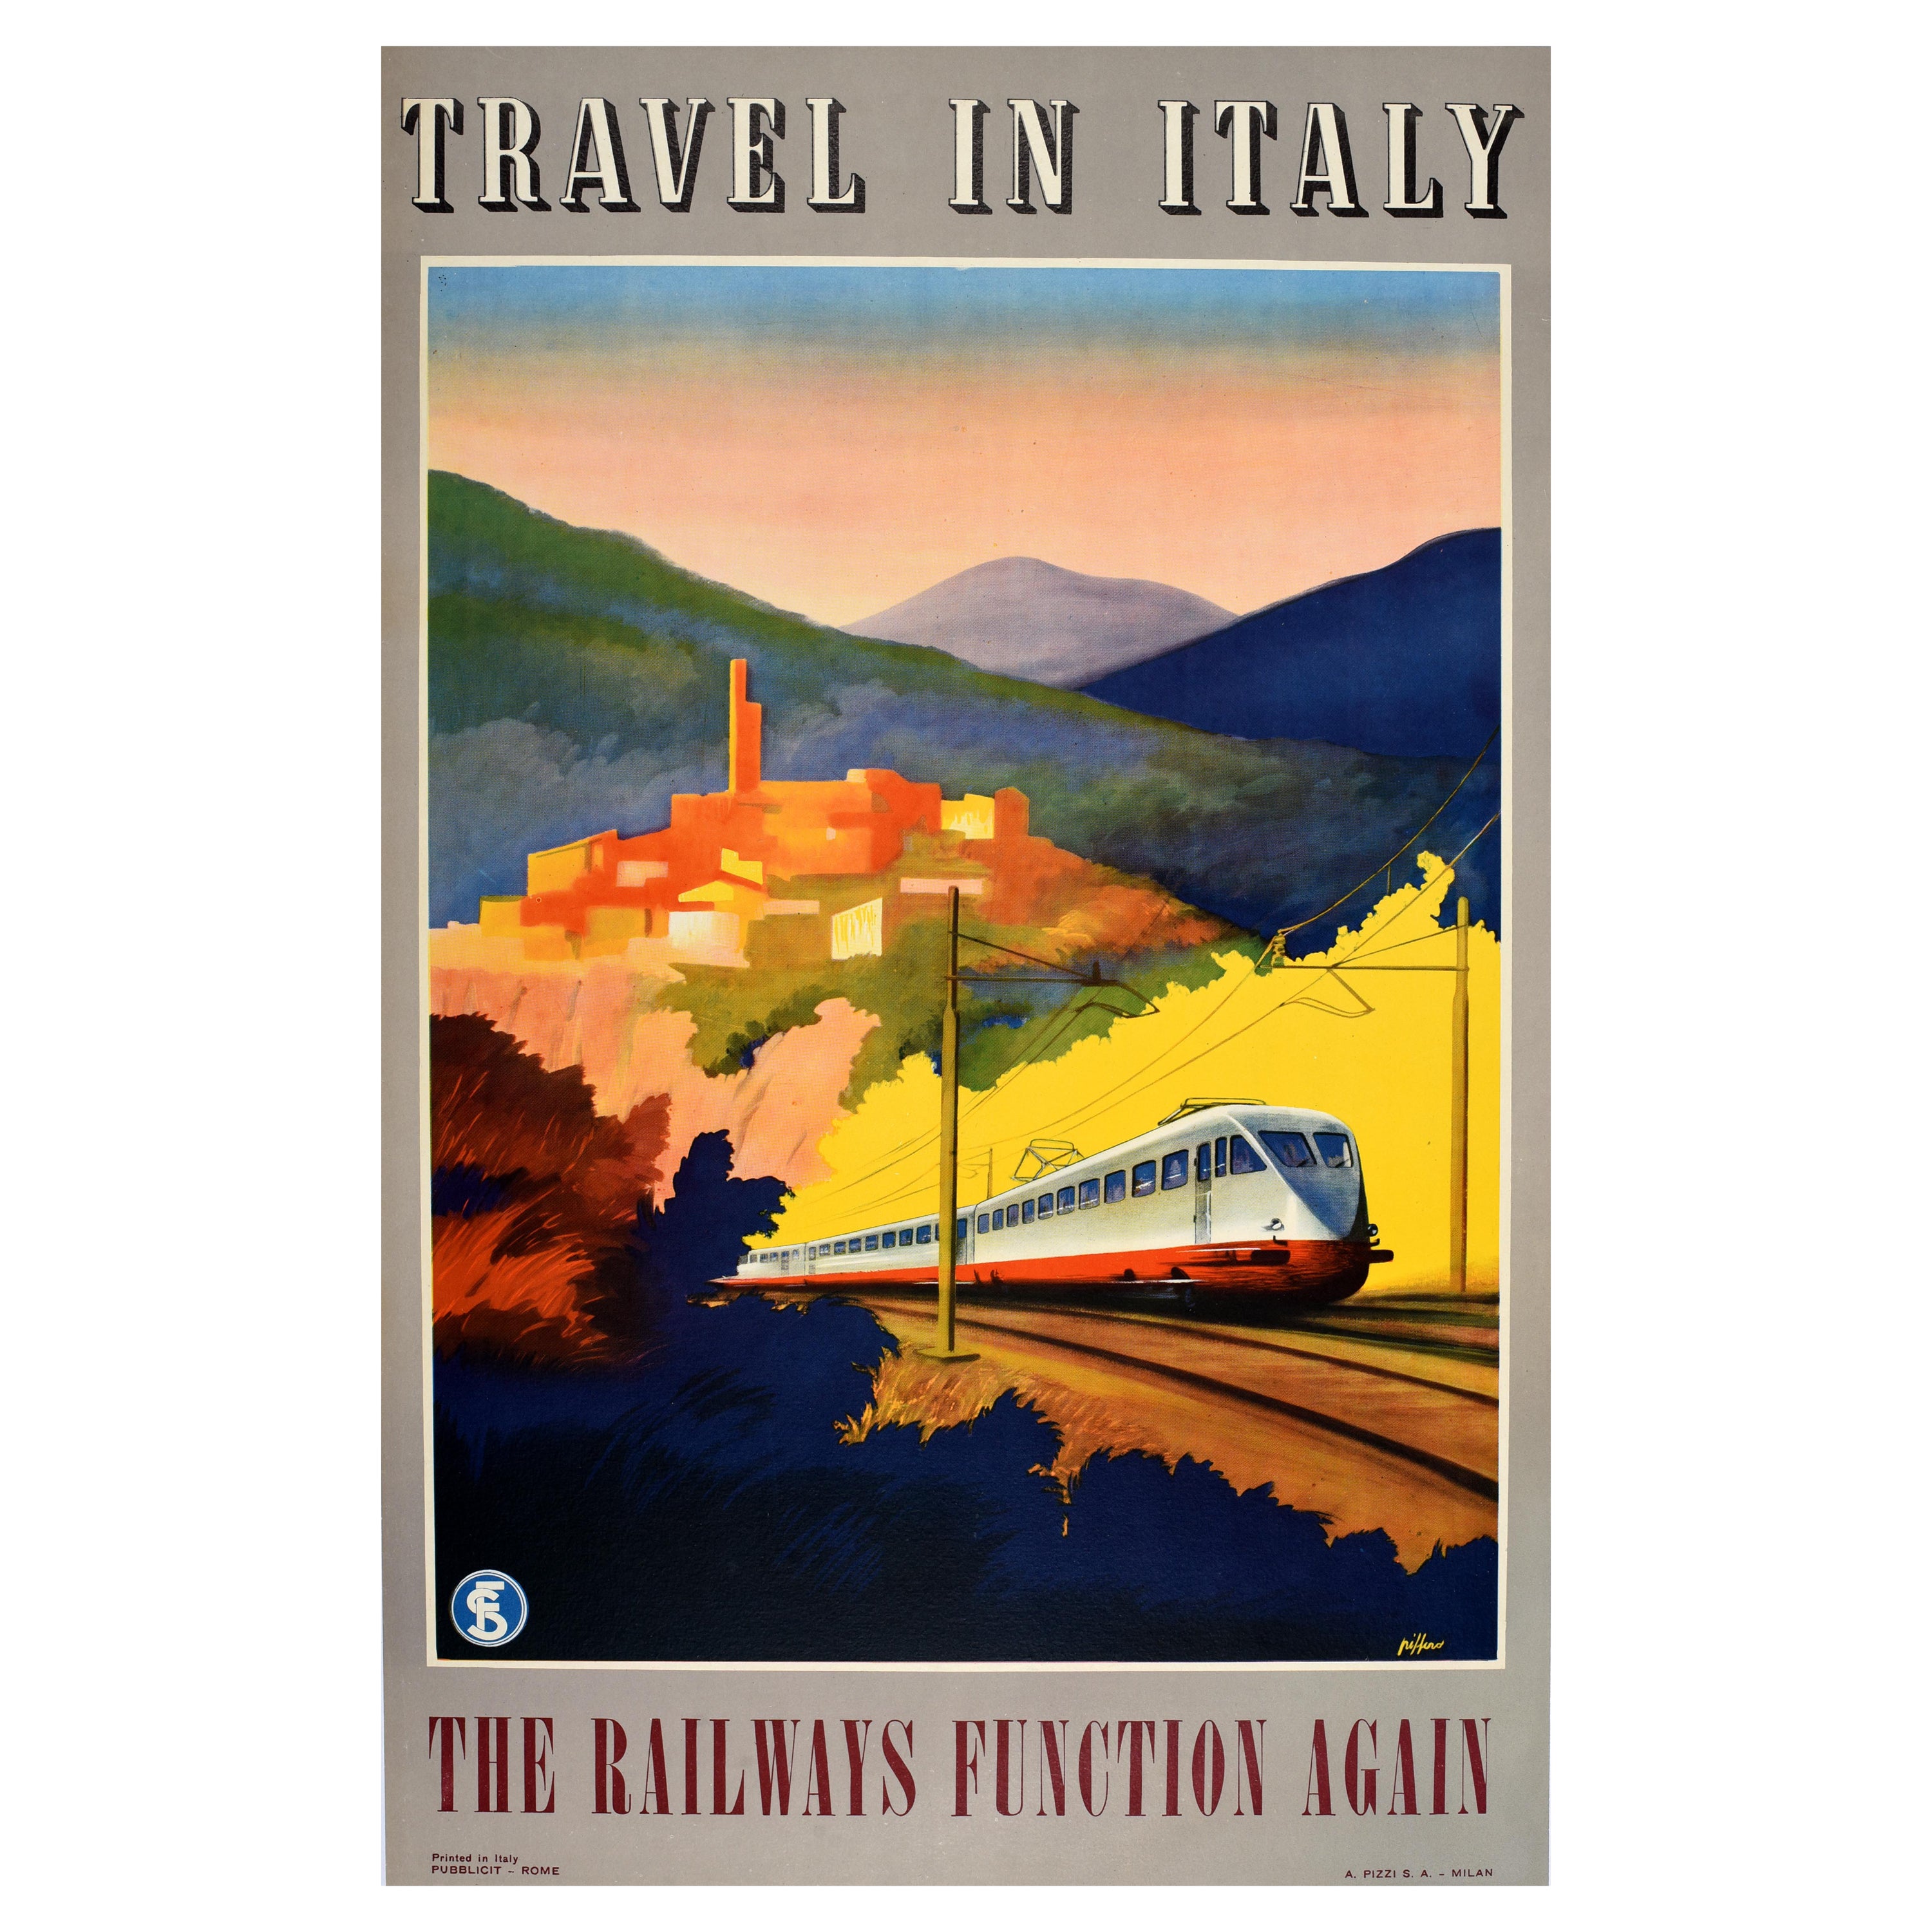 Original Vintage Train Poster Travel Italy Italian State Railways Function Again For Sale